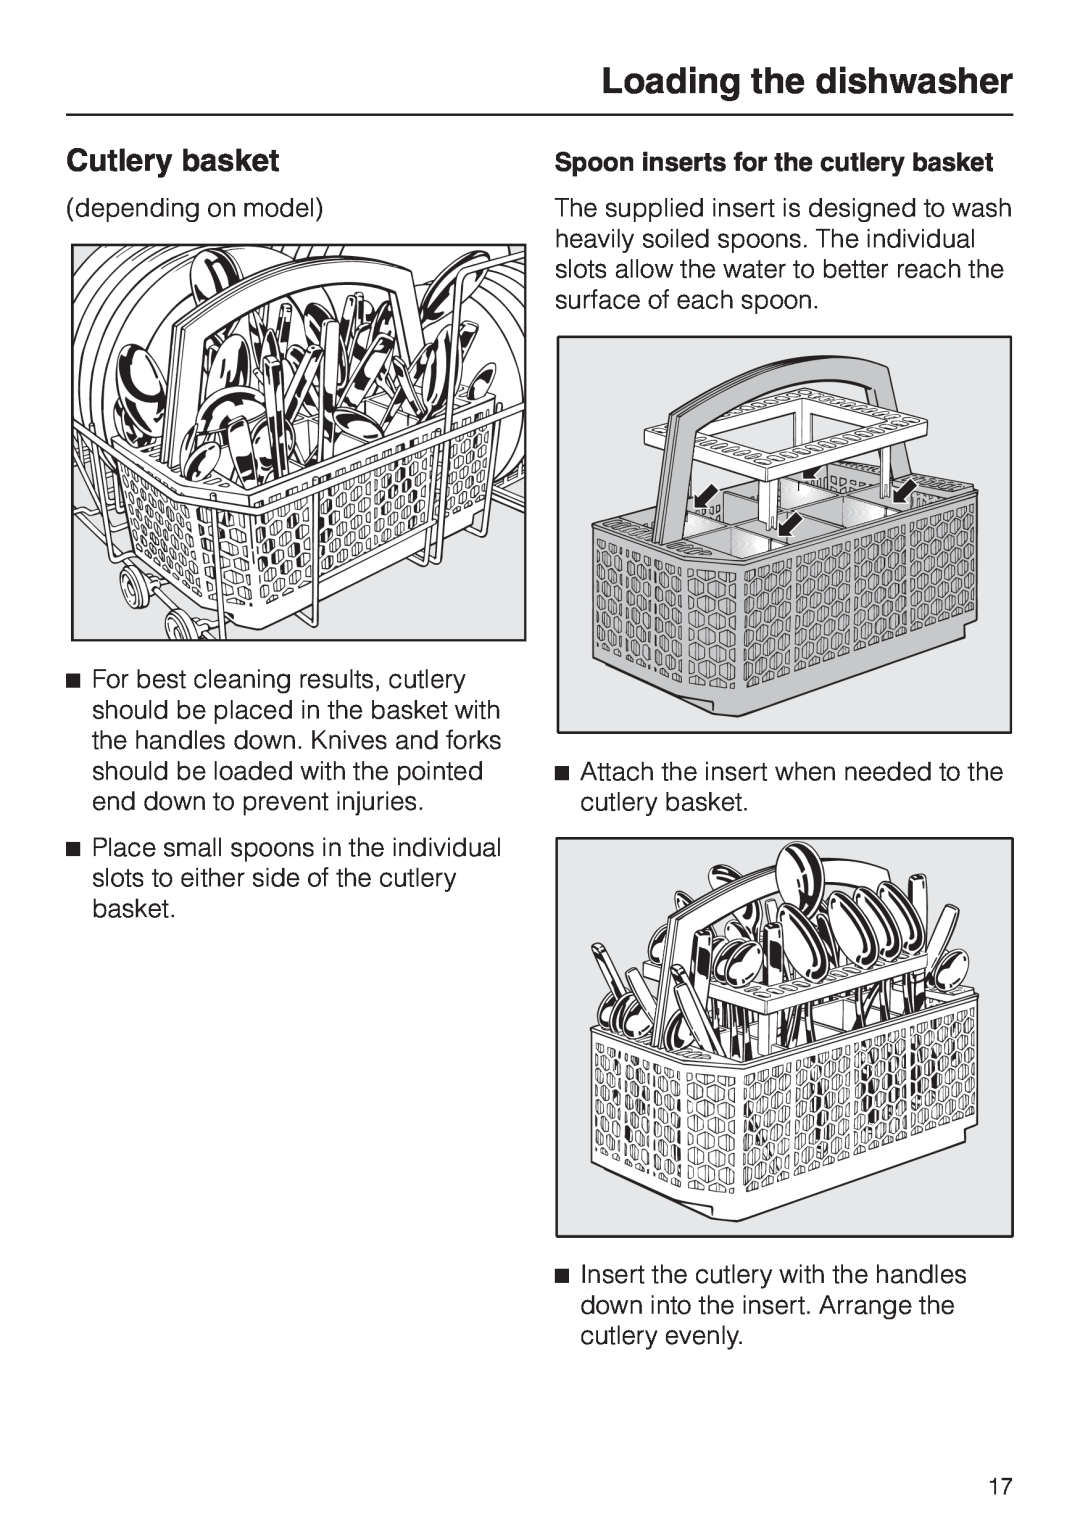 Miele G 2180, G 2170 operating instructions Cutlery basket, Loading the dishwasher, Spoon inserts for the cutlery basket 